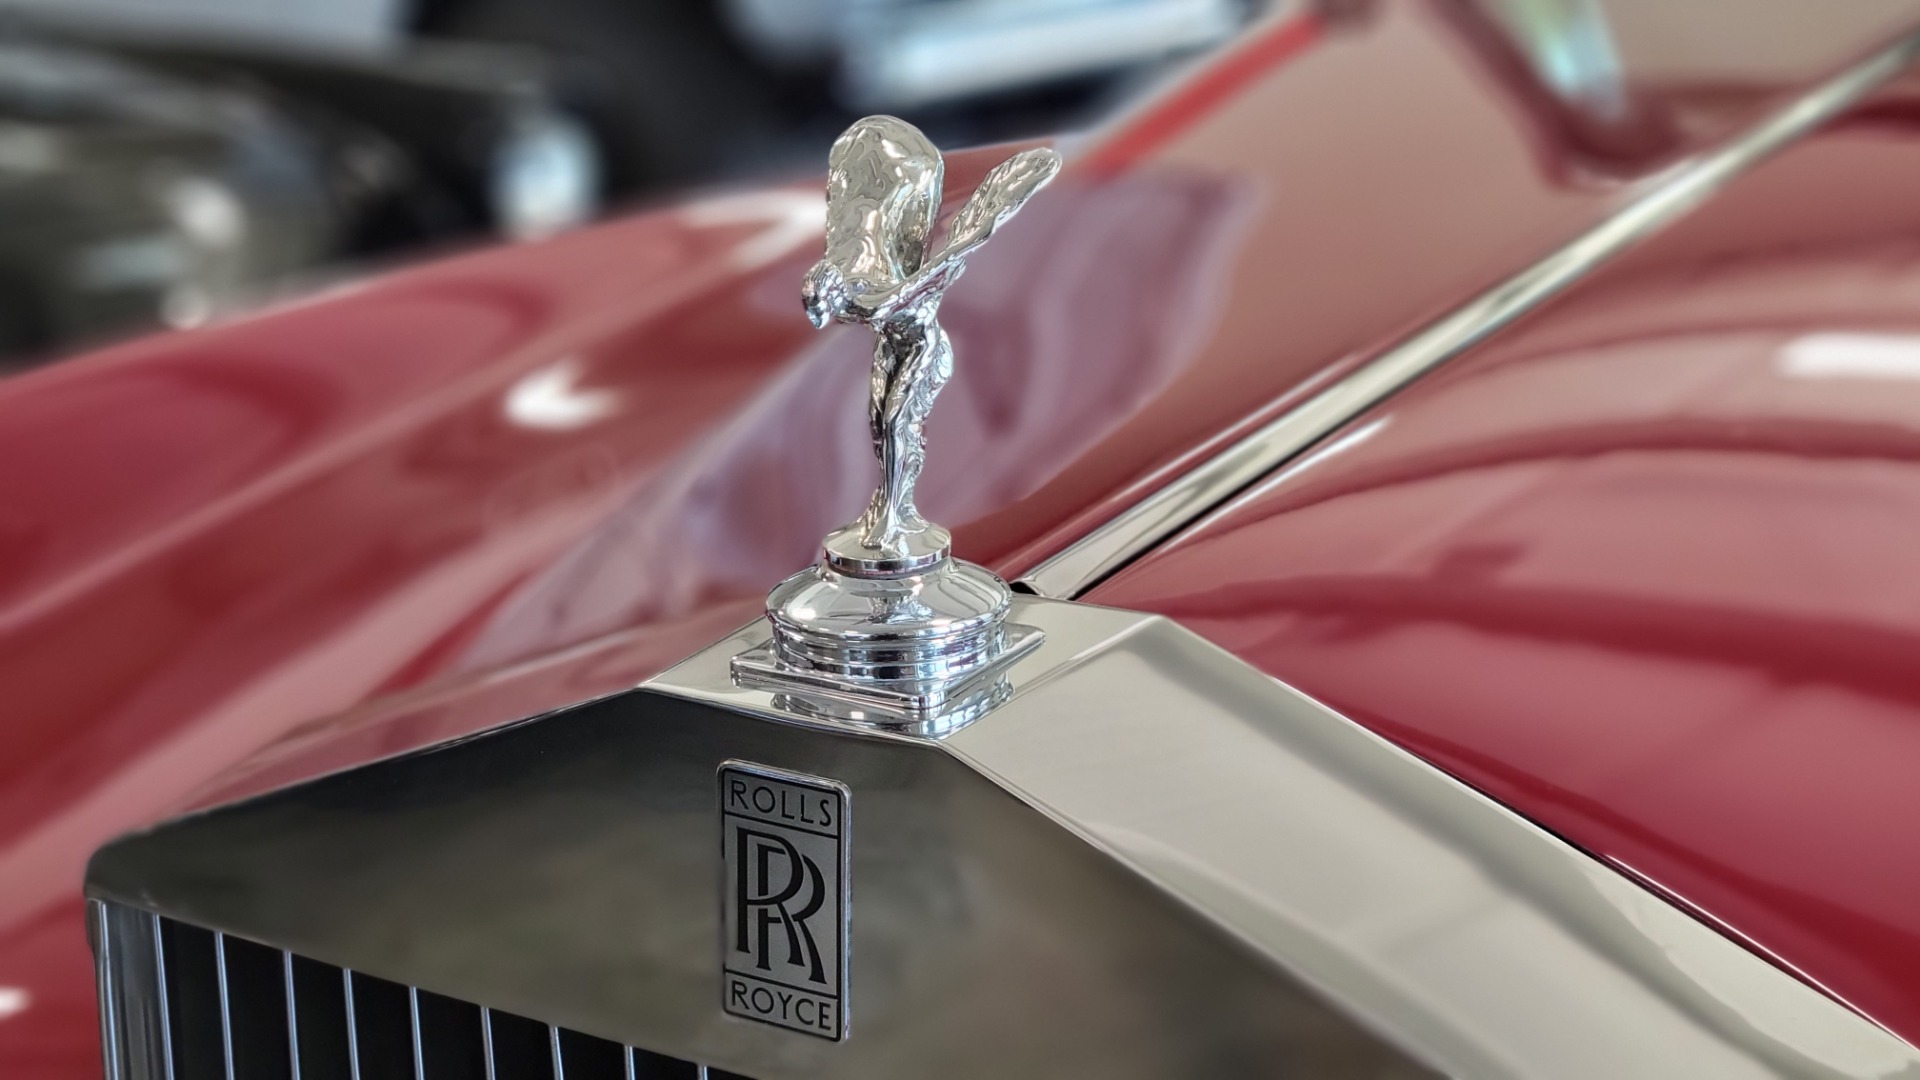 Used 1963 Rolls-Royce SILVER CLOUD III CONVERTIBLE / V8 / AUTOMATIC / RESTORED / LOW MILES for sale $229,000 at Formula Imports in Charlotte NC 28227 80